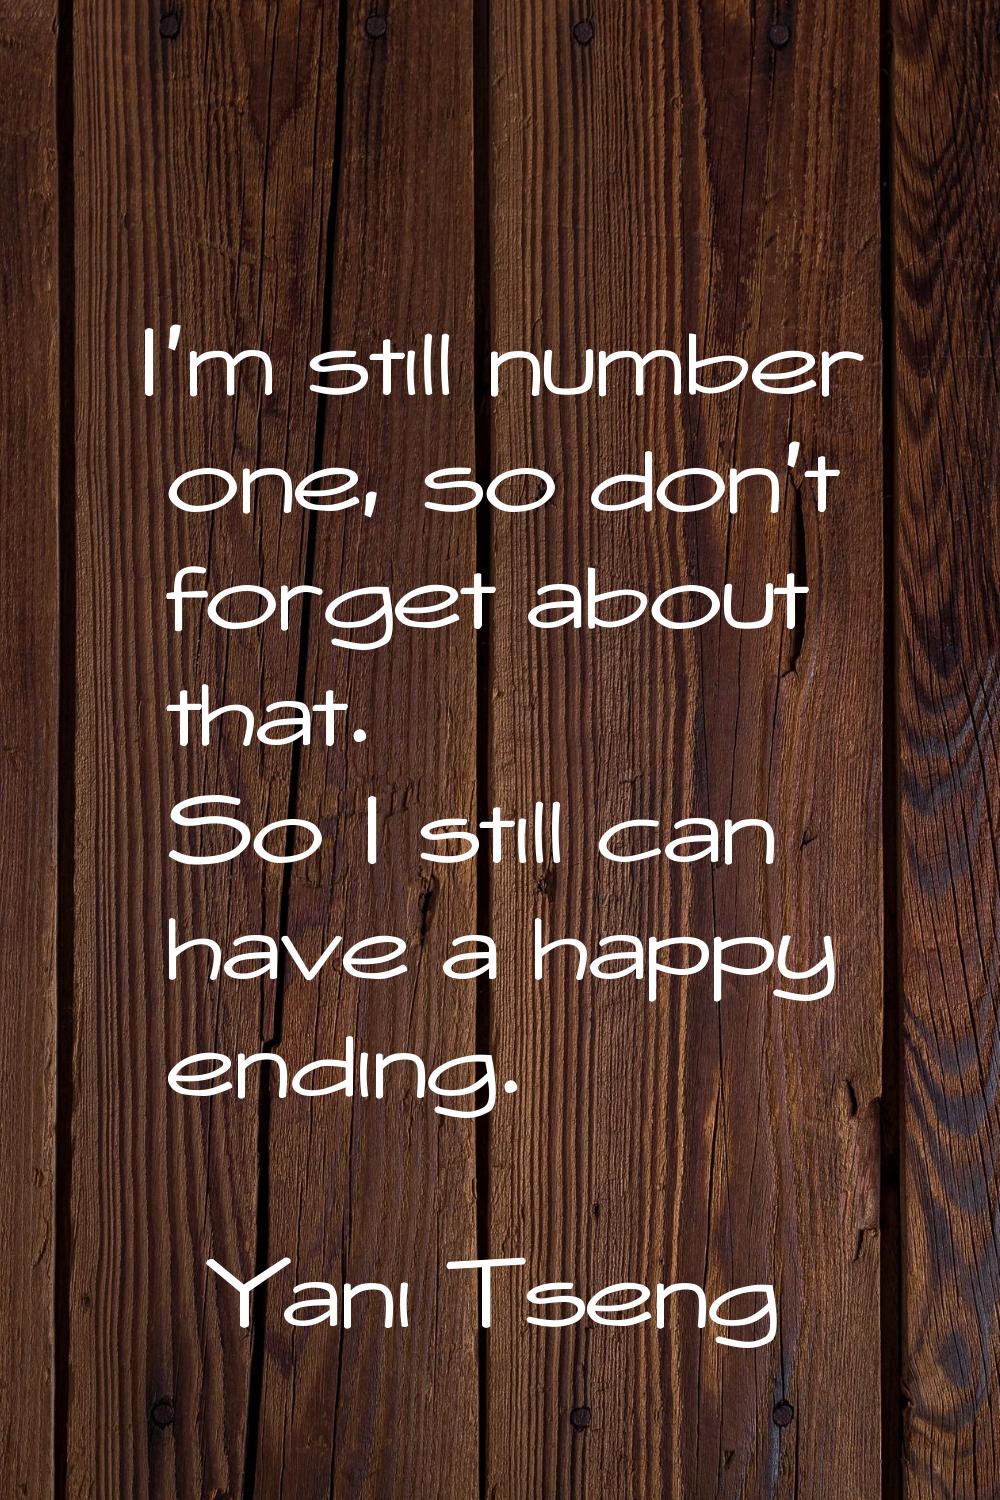 I'm still number one, so don't forget about that. So I still can have a happy ending.